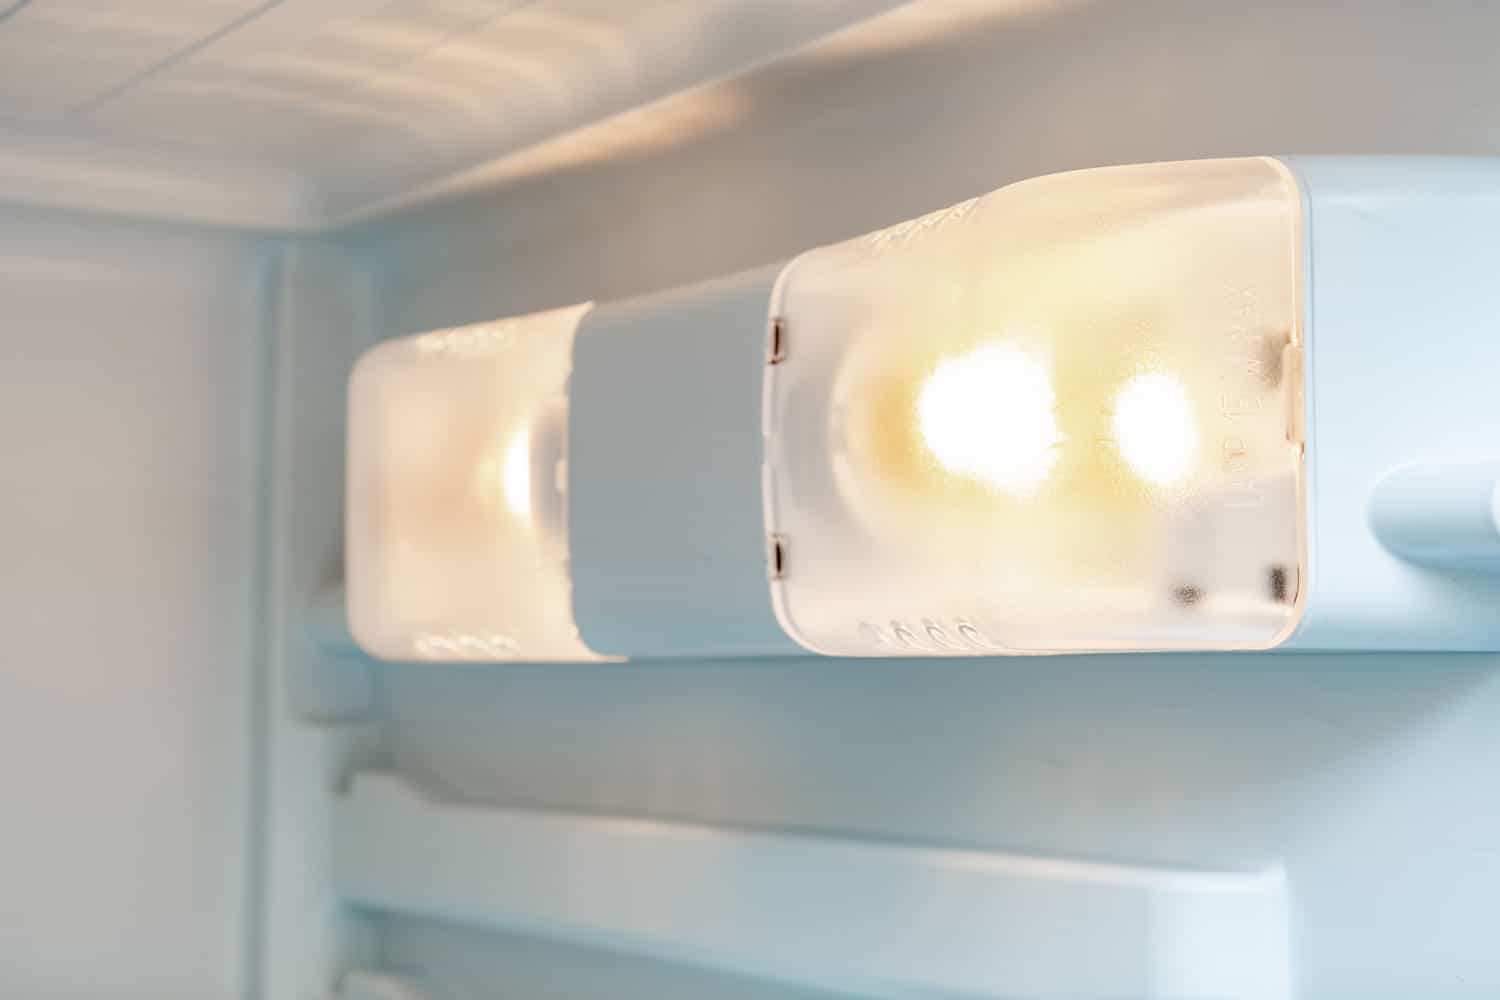 A light inside the fridge, refrigerator close up, a lamp that response to turn on when the door is open,